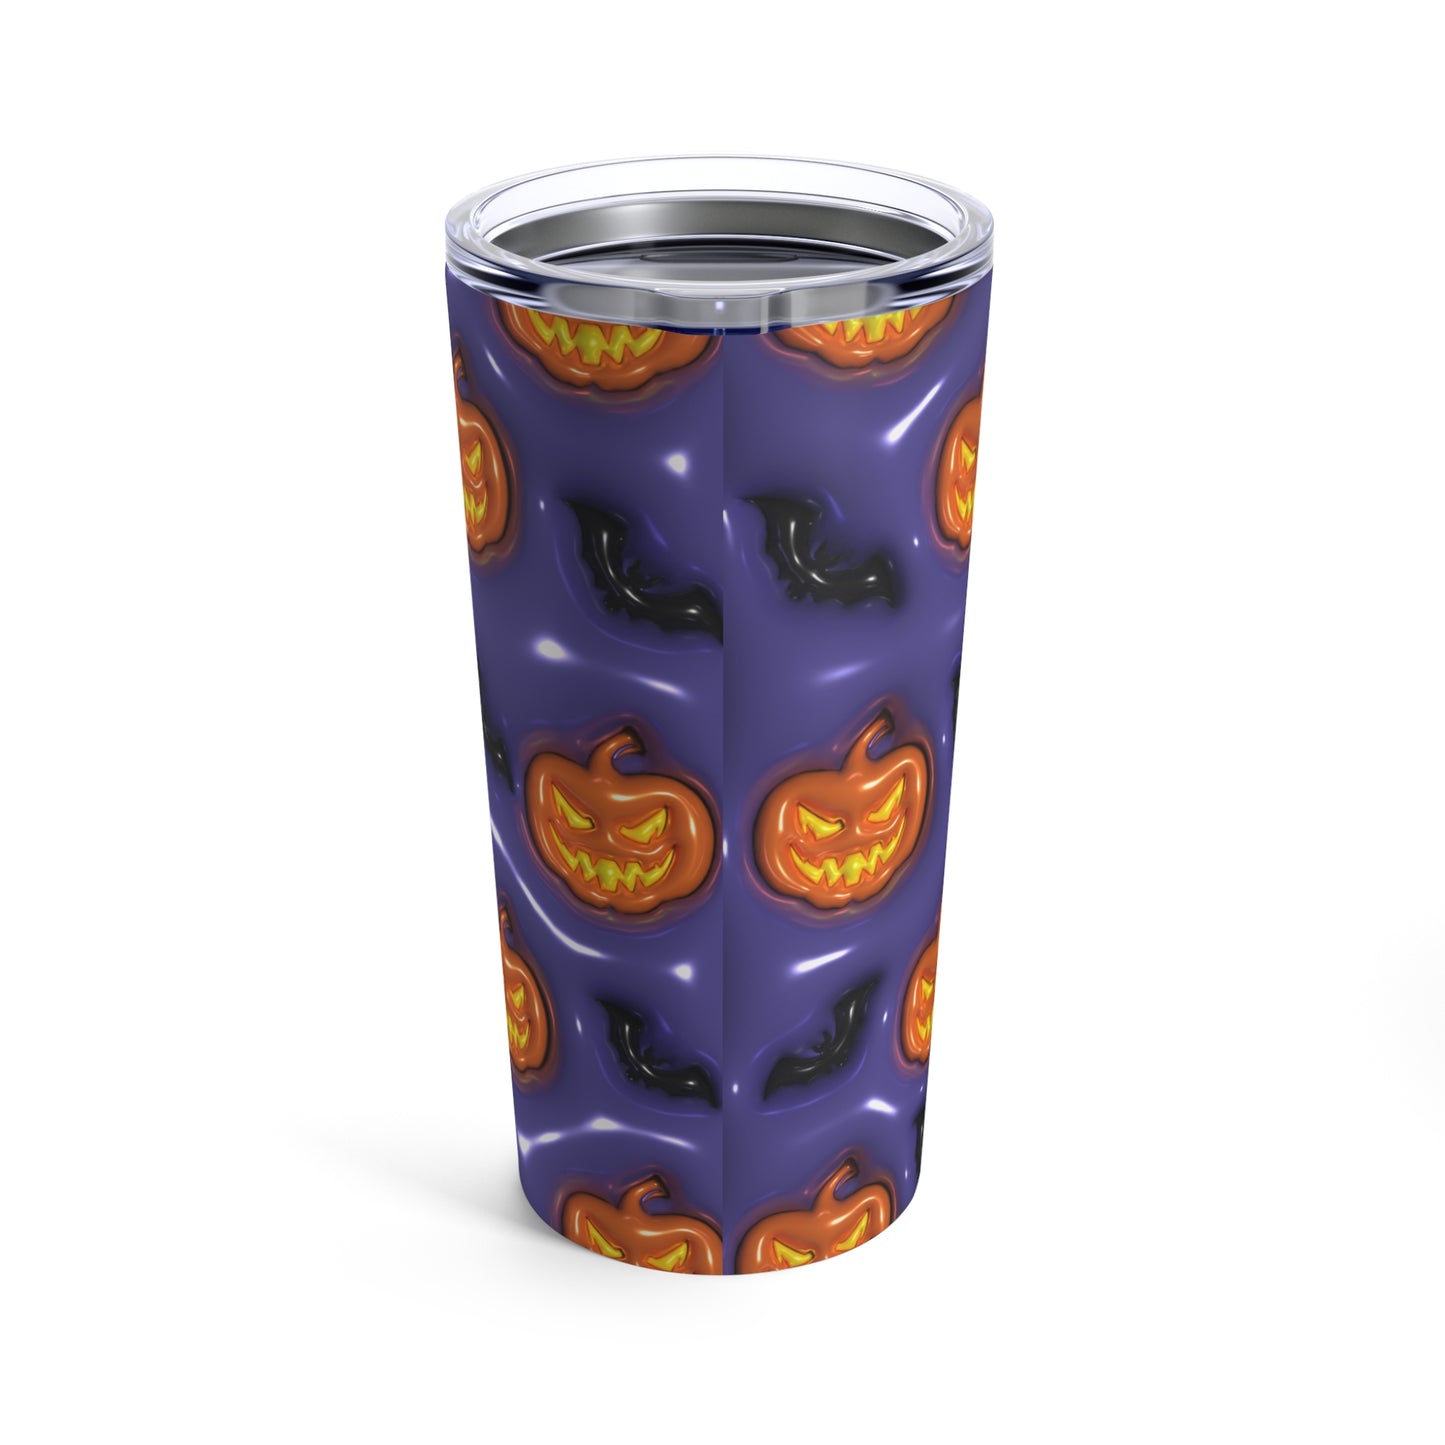 Orange Pumpkins And Black Bats With Purple Background 3-D Puffy Halloween by Mulew Art Tumbler 20oz